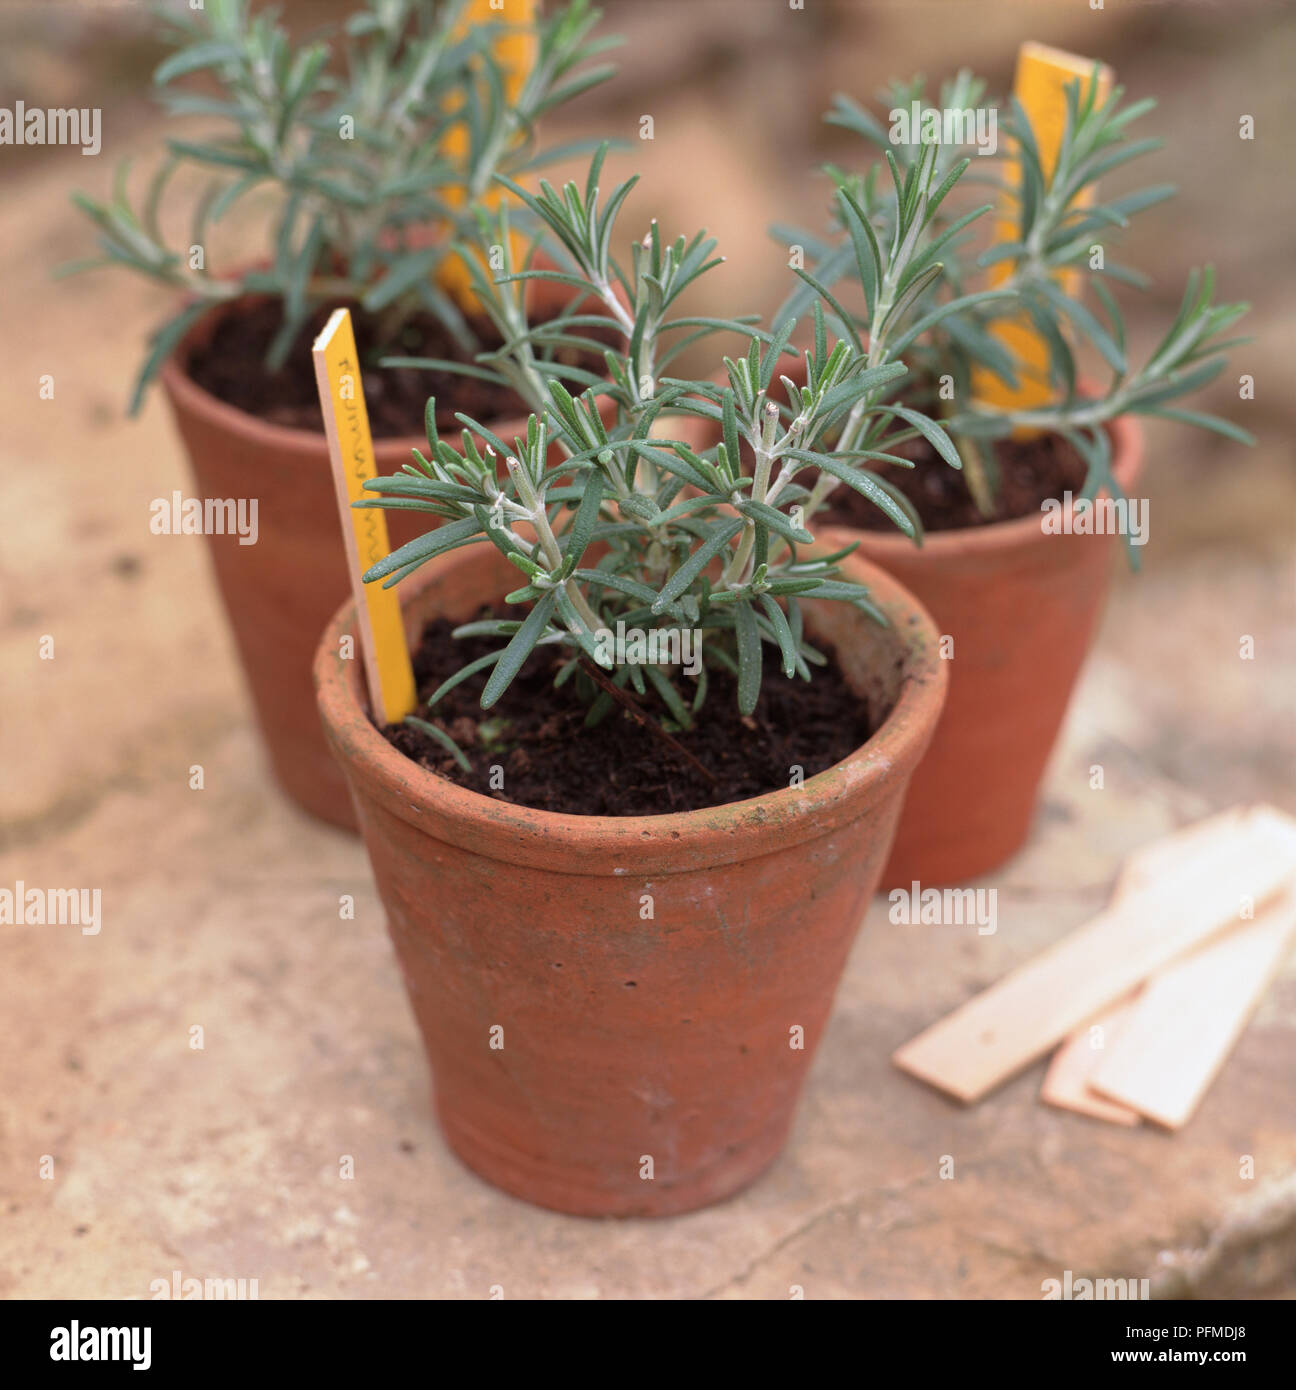 Rosemary growing in small terracotta pots, yellow markers identifying herbs. Stock Photo